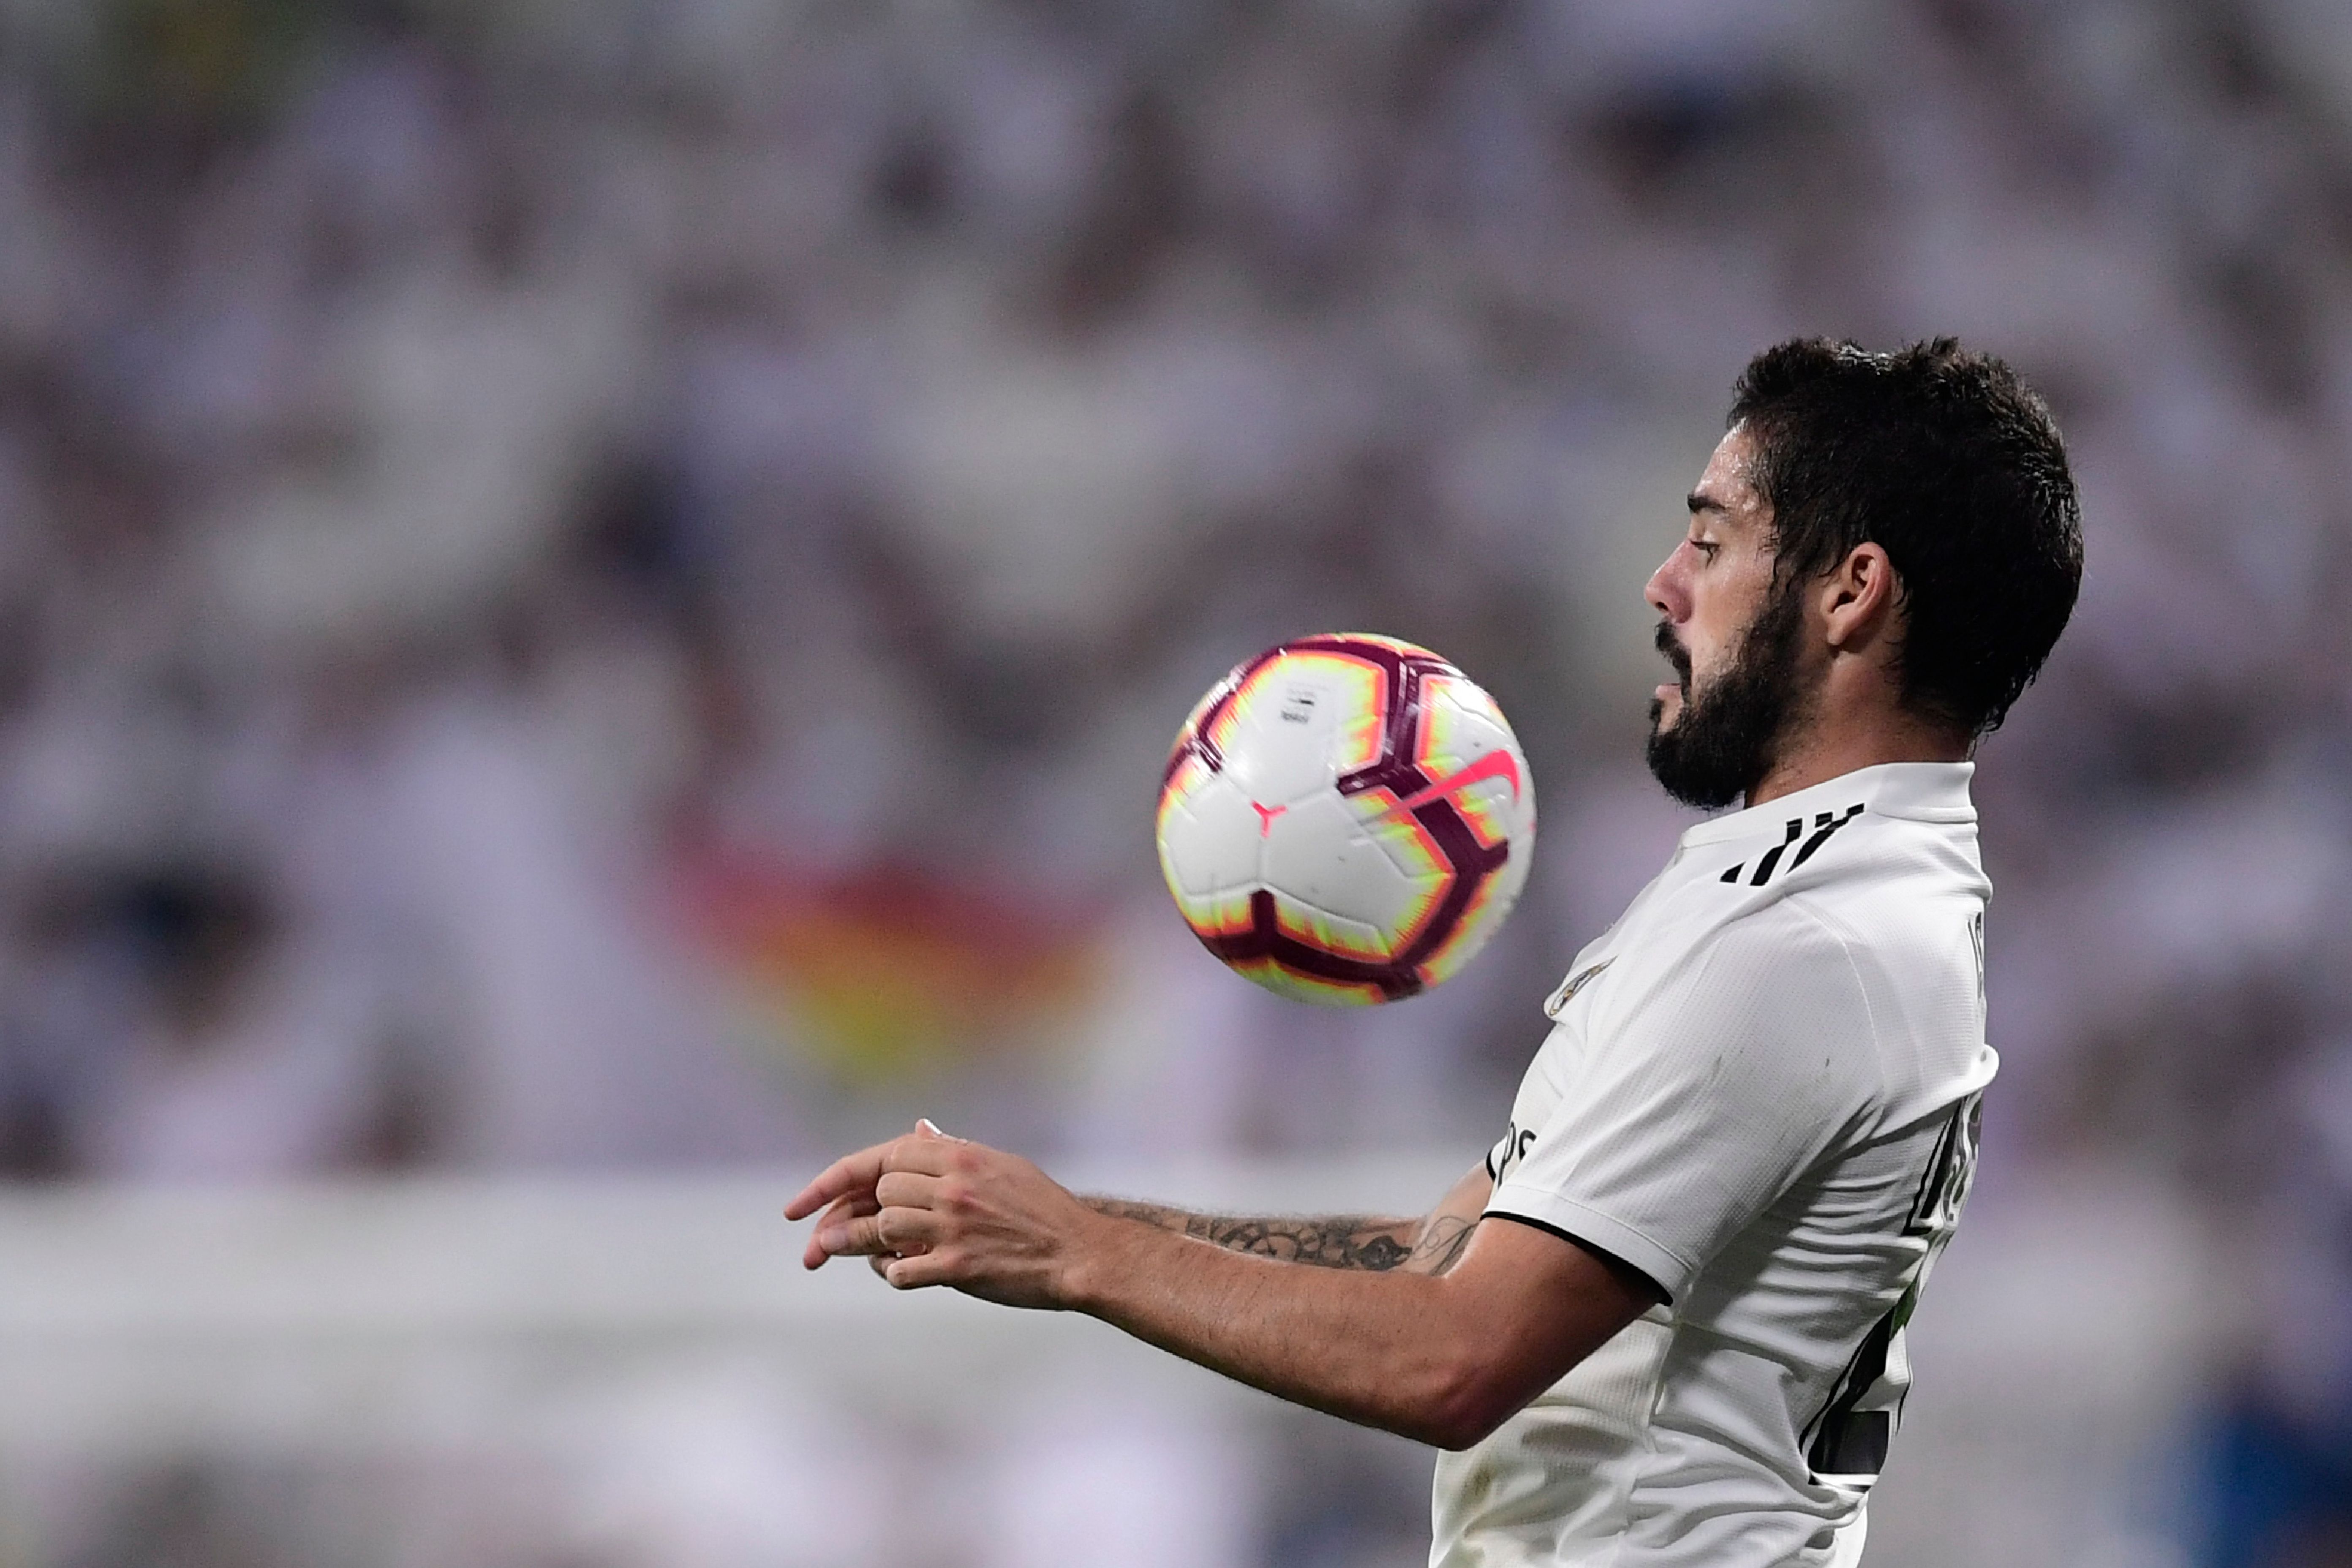 Real Madrid's Spanish midfielder Isco controls the ball during the Spanish league football match between Real Madrid CF and RCD Espanyol at the Santiago Bernabeu stadium in Madrid on September 22, 2018. (Photo by JAVIER SORIANO / AFP)        (Photo credit should read JAVIER SORIANO/AFP/Getty Images)